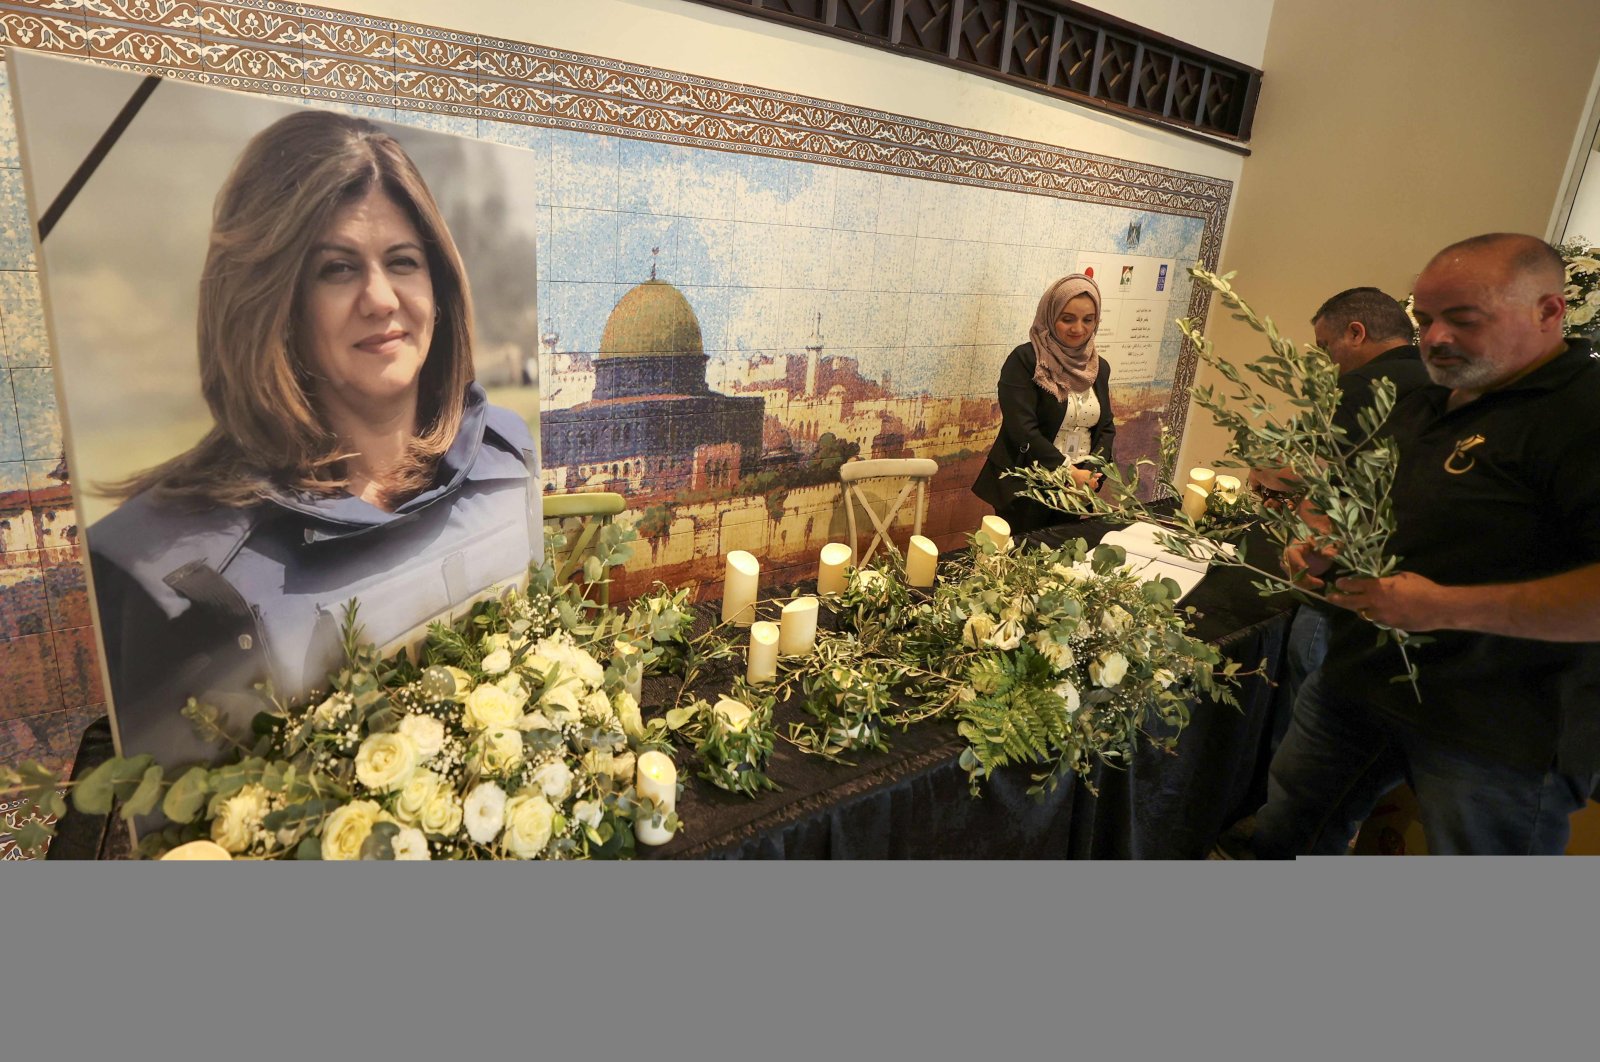 Mourners attend a memorial ceremony for Shireen Abu Akleh to mark the 40th day of the killing of the Al Jazeera journalist, Ramallah, West Bank, June 19, 2022. (AFP Photo)